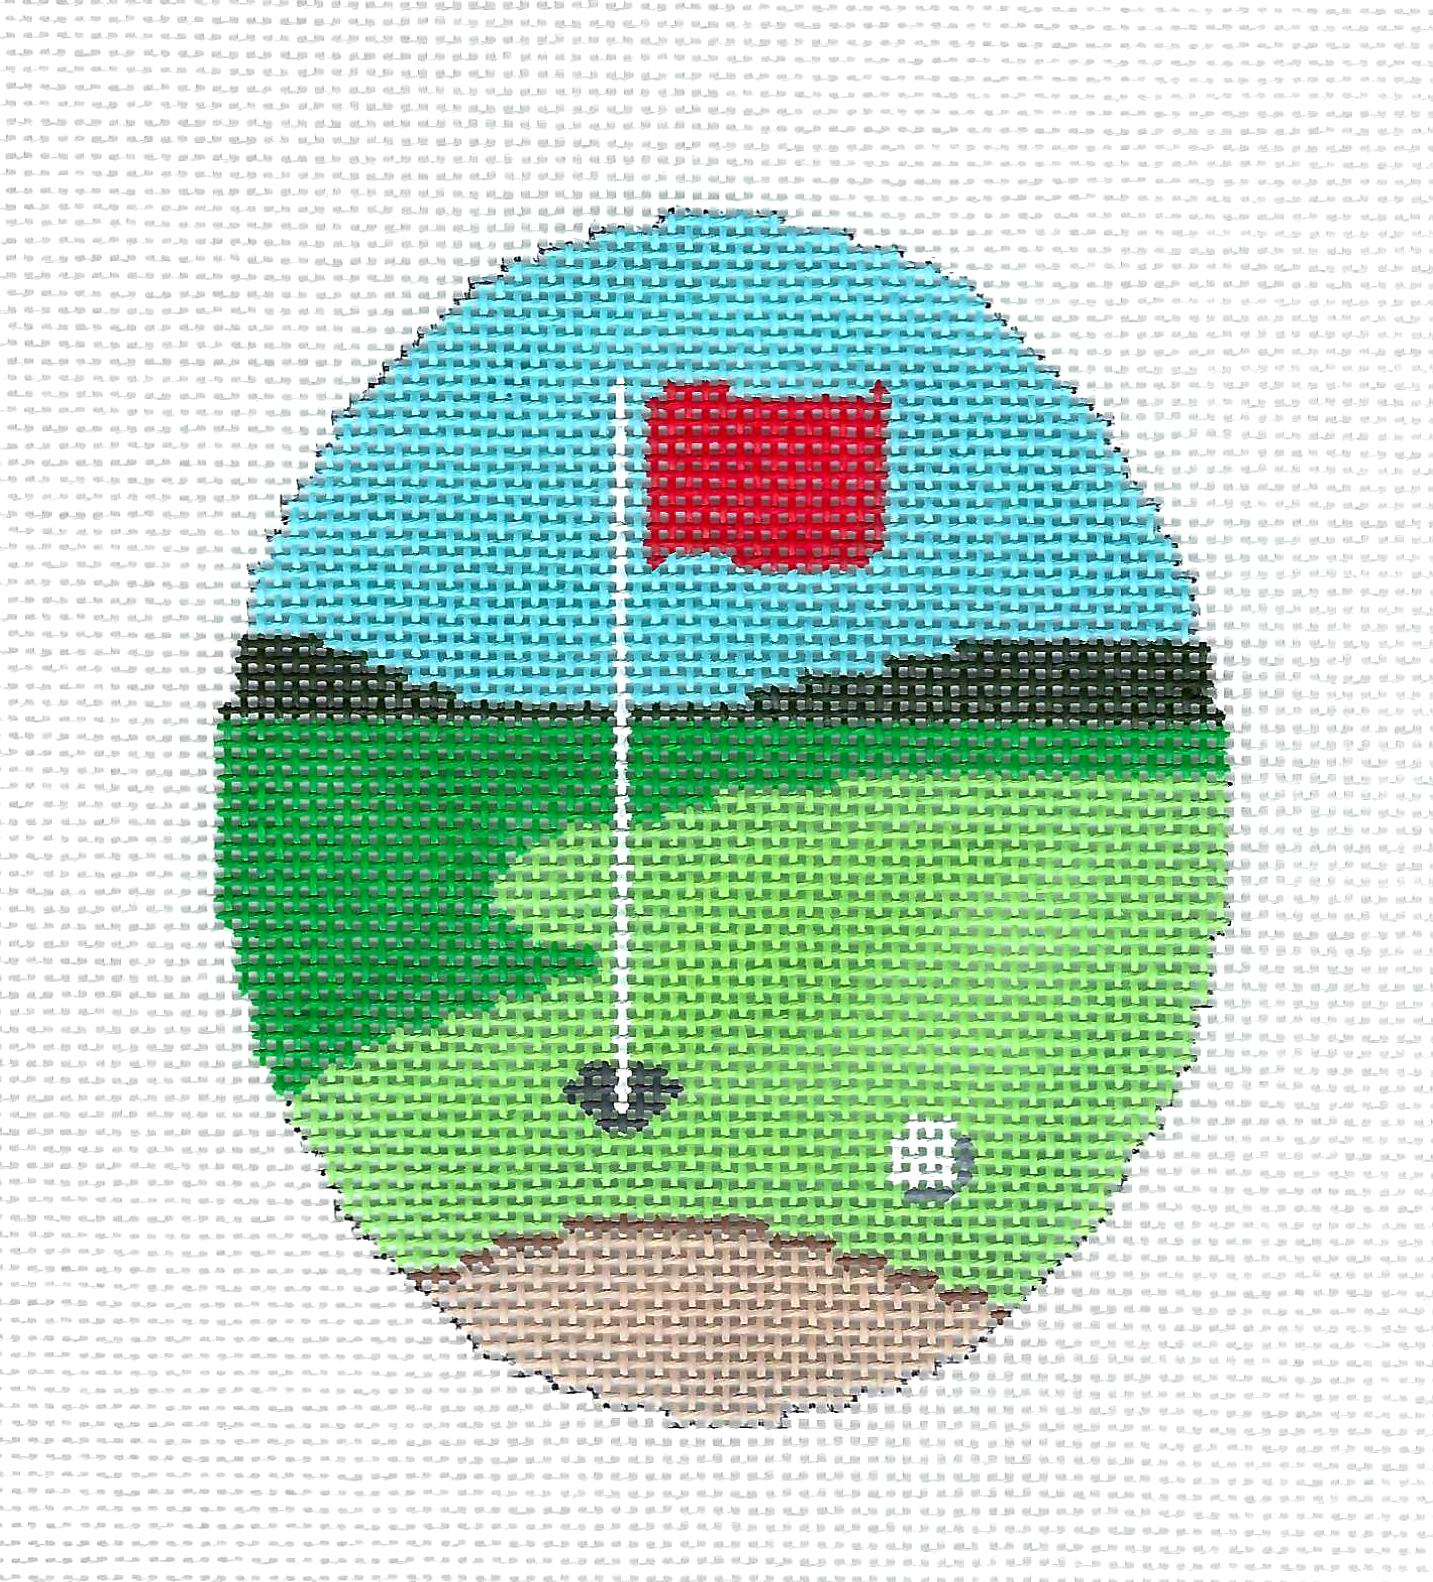 Sports ~ Golfing Hole in One Ornament 18 mesh handpainted Needlepoint Oval Ornament Canvas by Zia from Danji